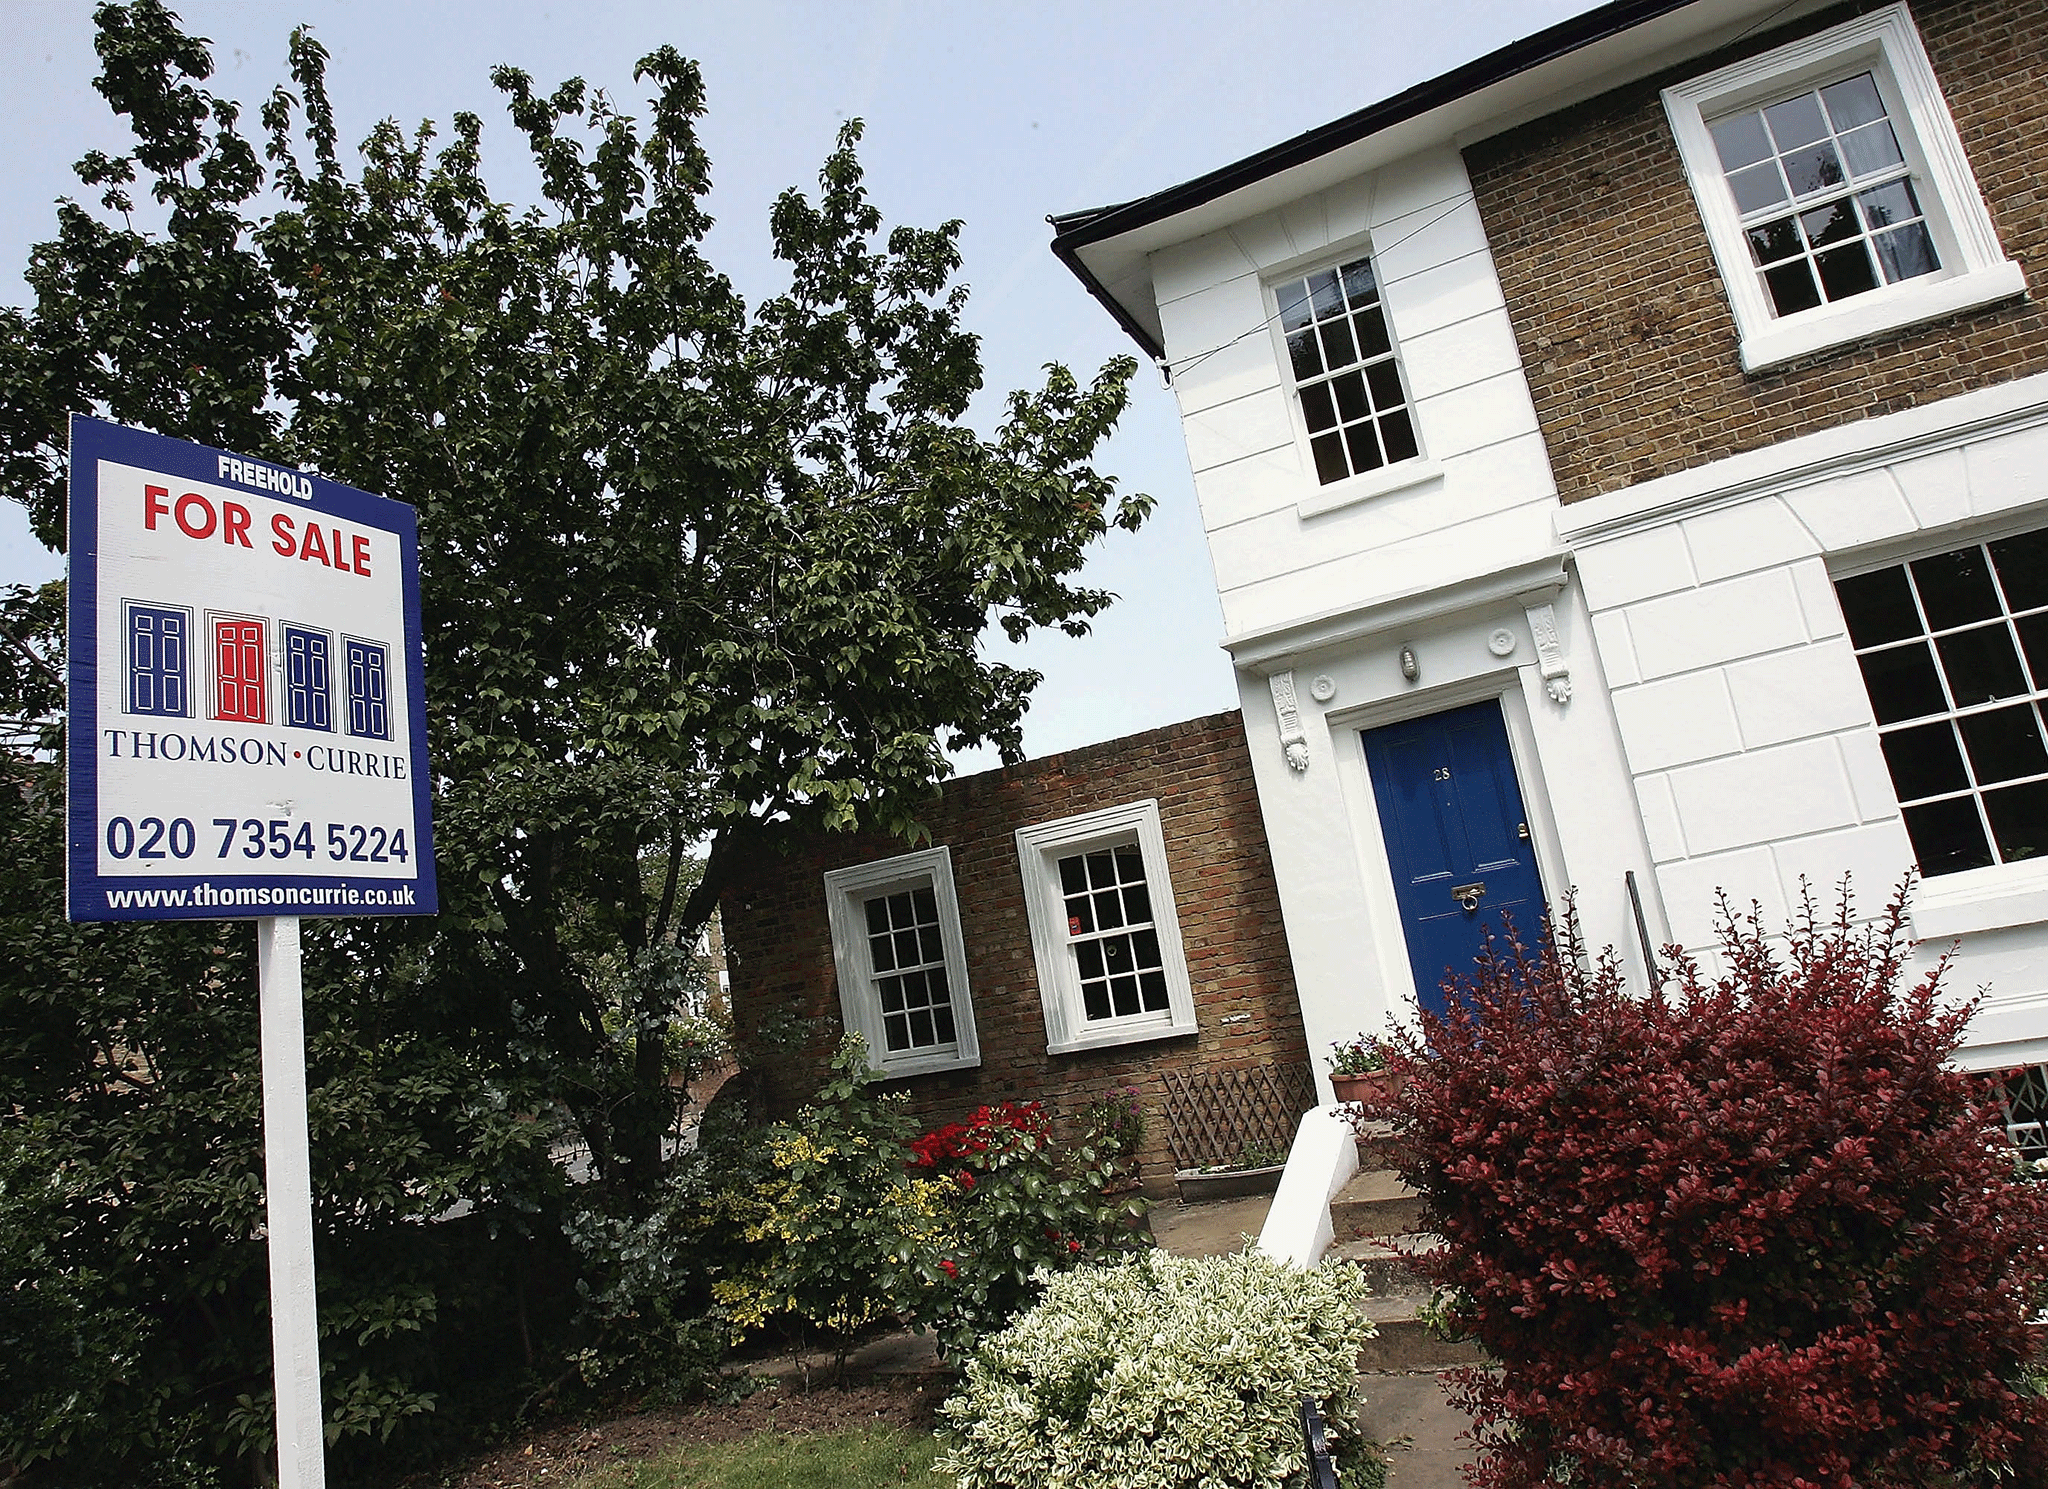 Rightmove looked at how local housing markets have changed over the past year, including the number of properties available and the number of days it takes to secure a buyer